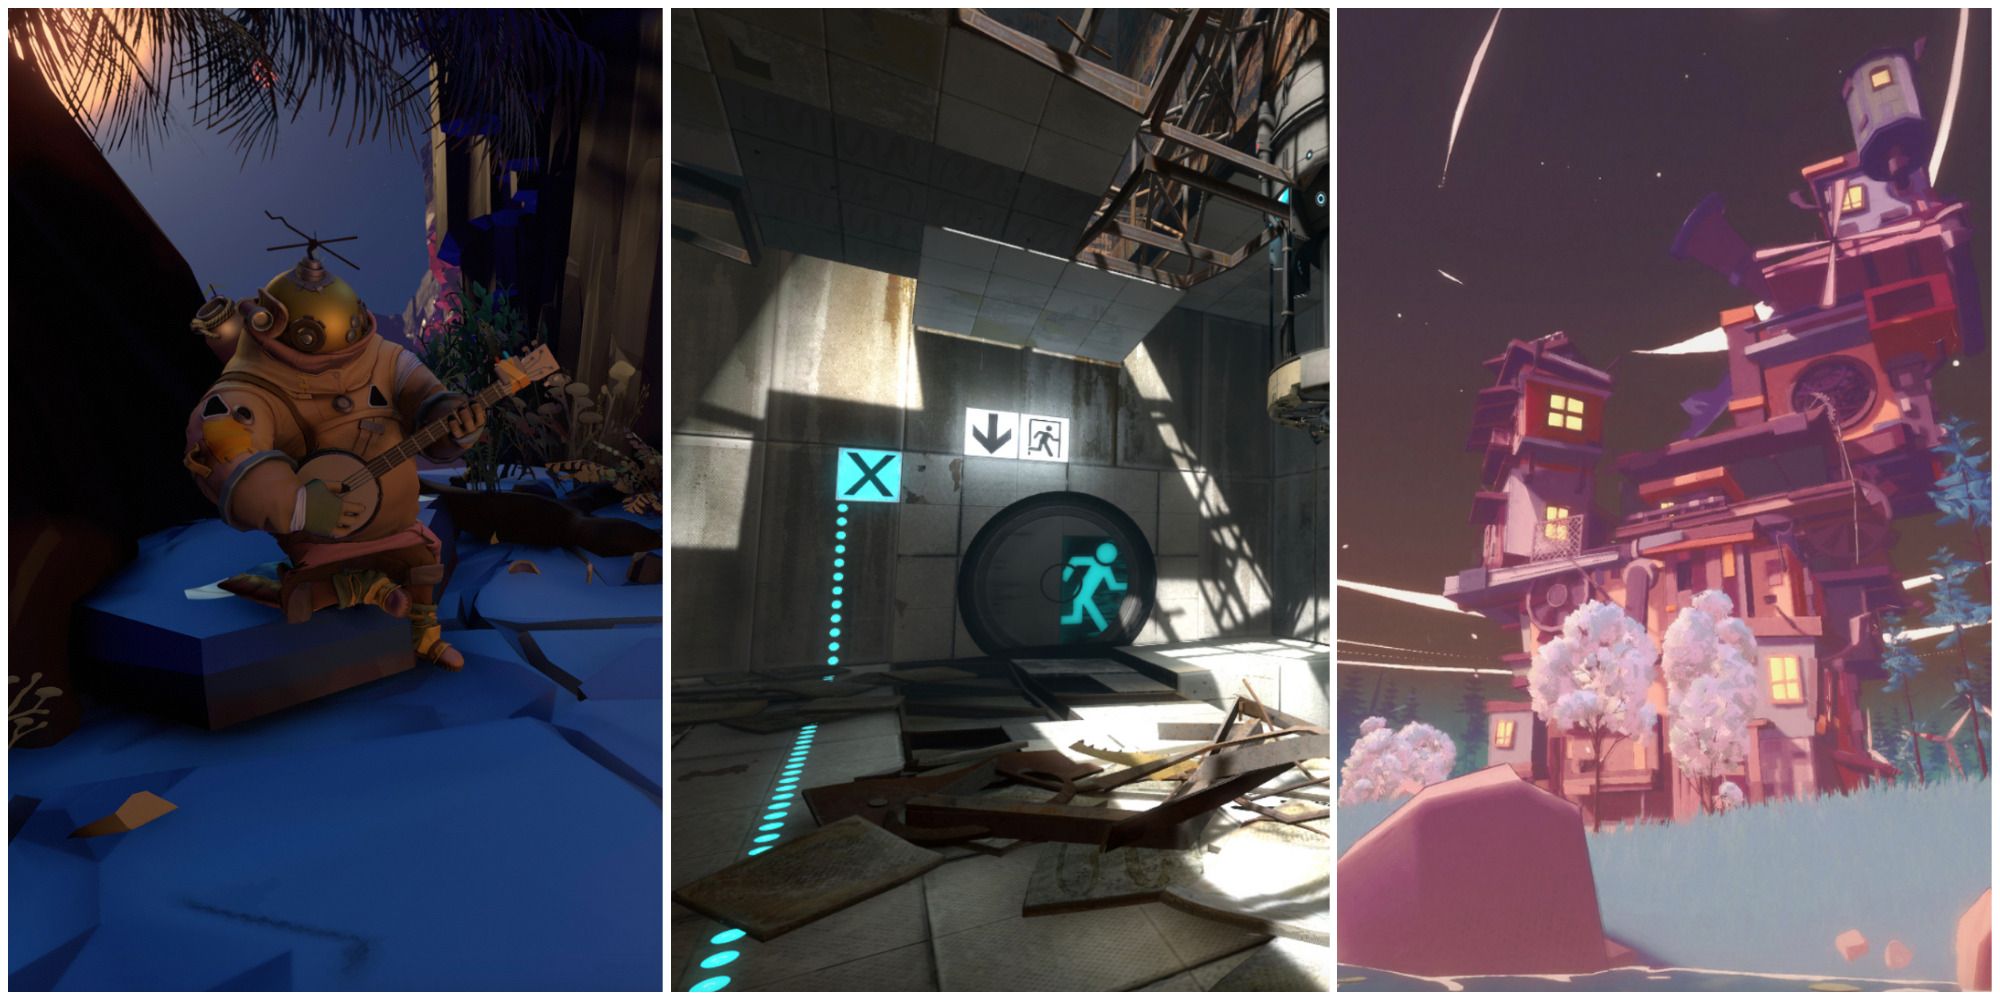 outer wilds character playing banjo, portal 2 door, summertime madness house featured